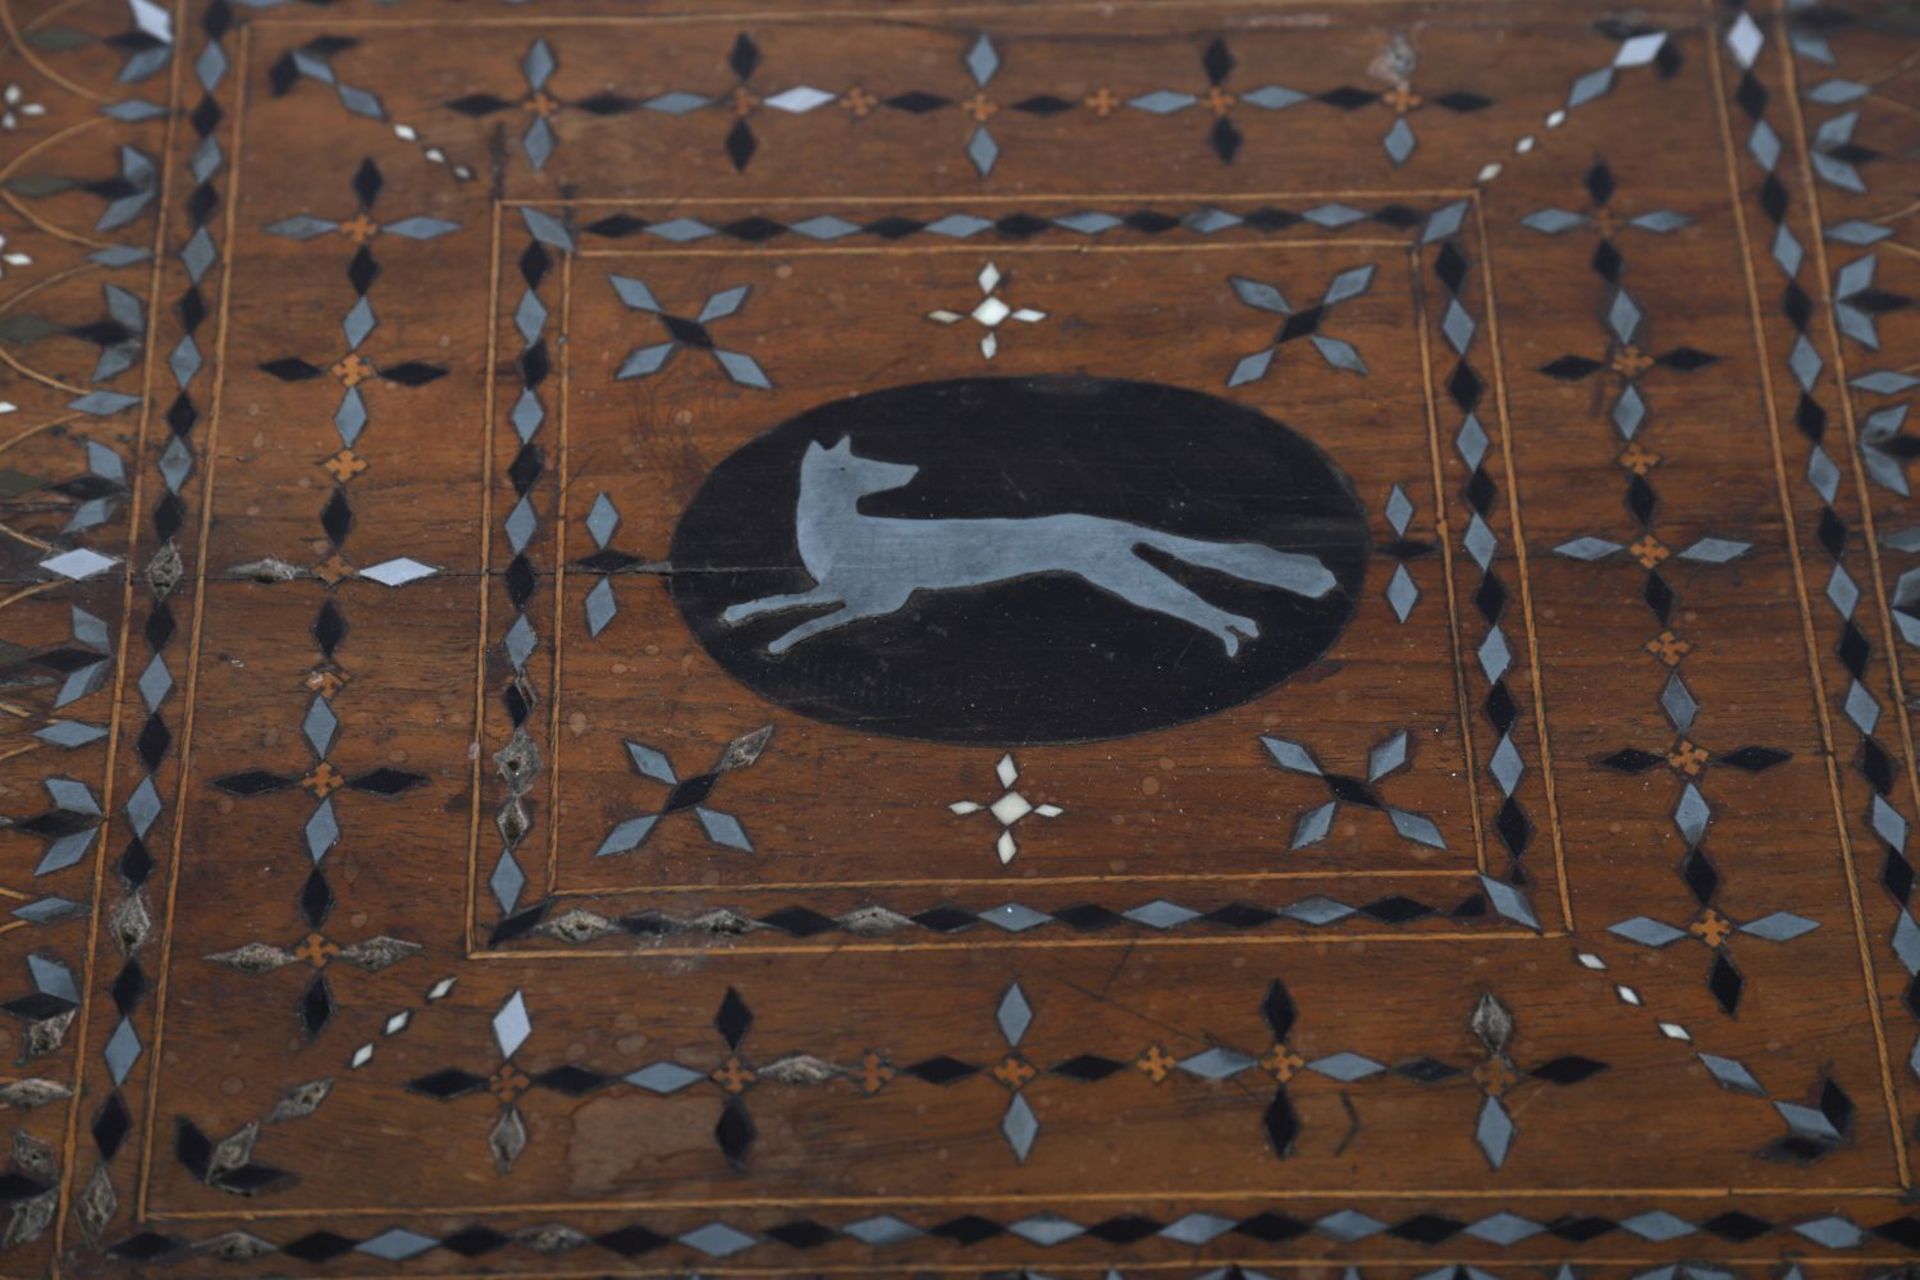 19TH-CENTURY OTTOMAN MARQUETRY CENTRE TABLE - Image 4 of 4